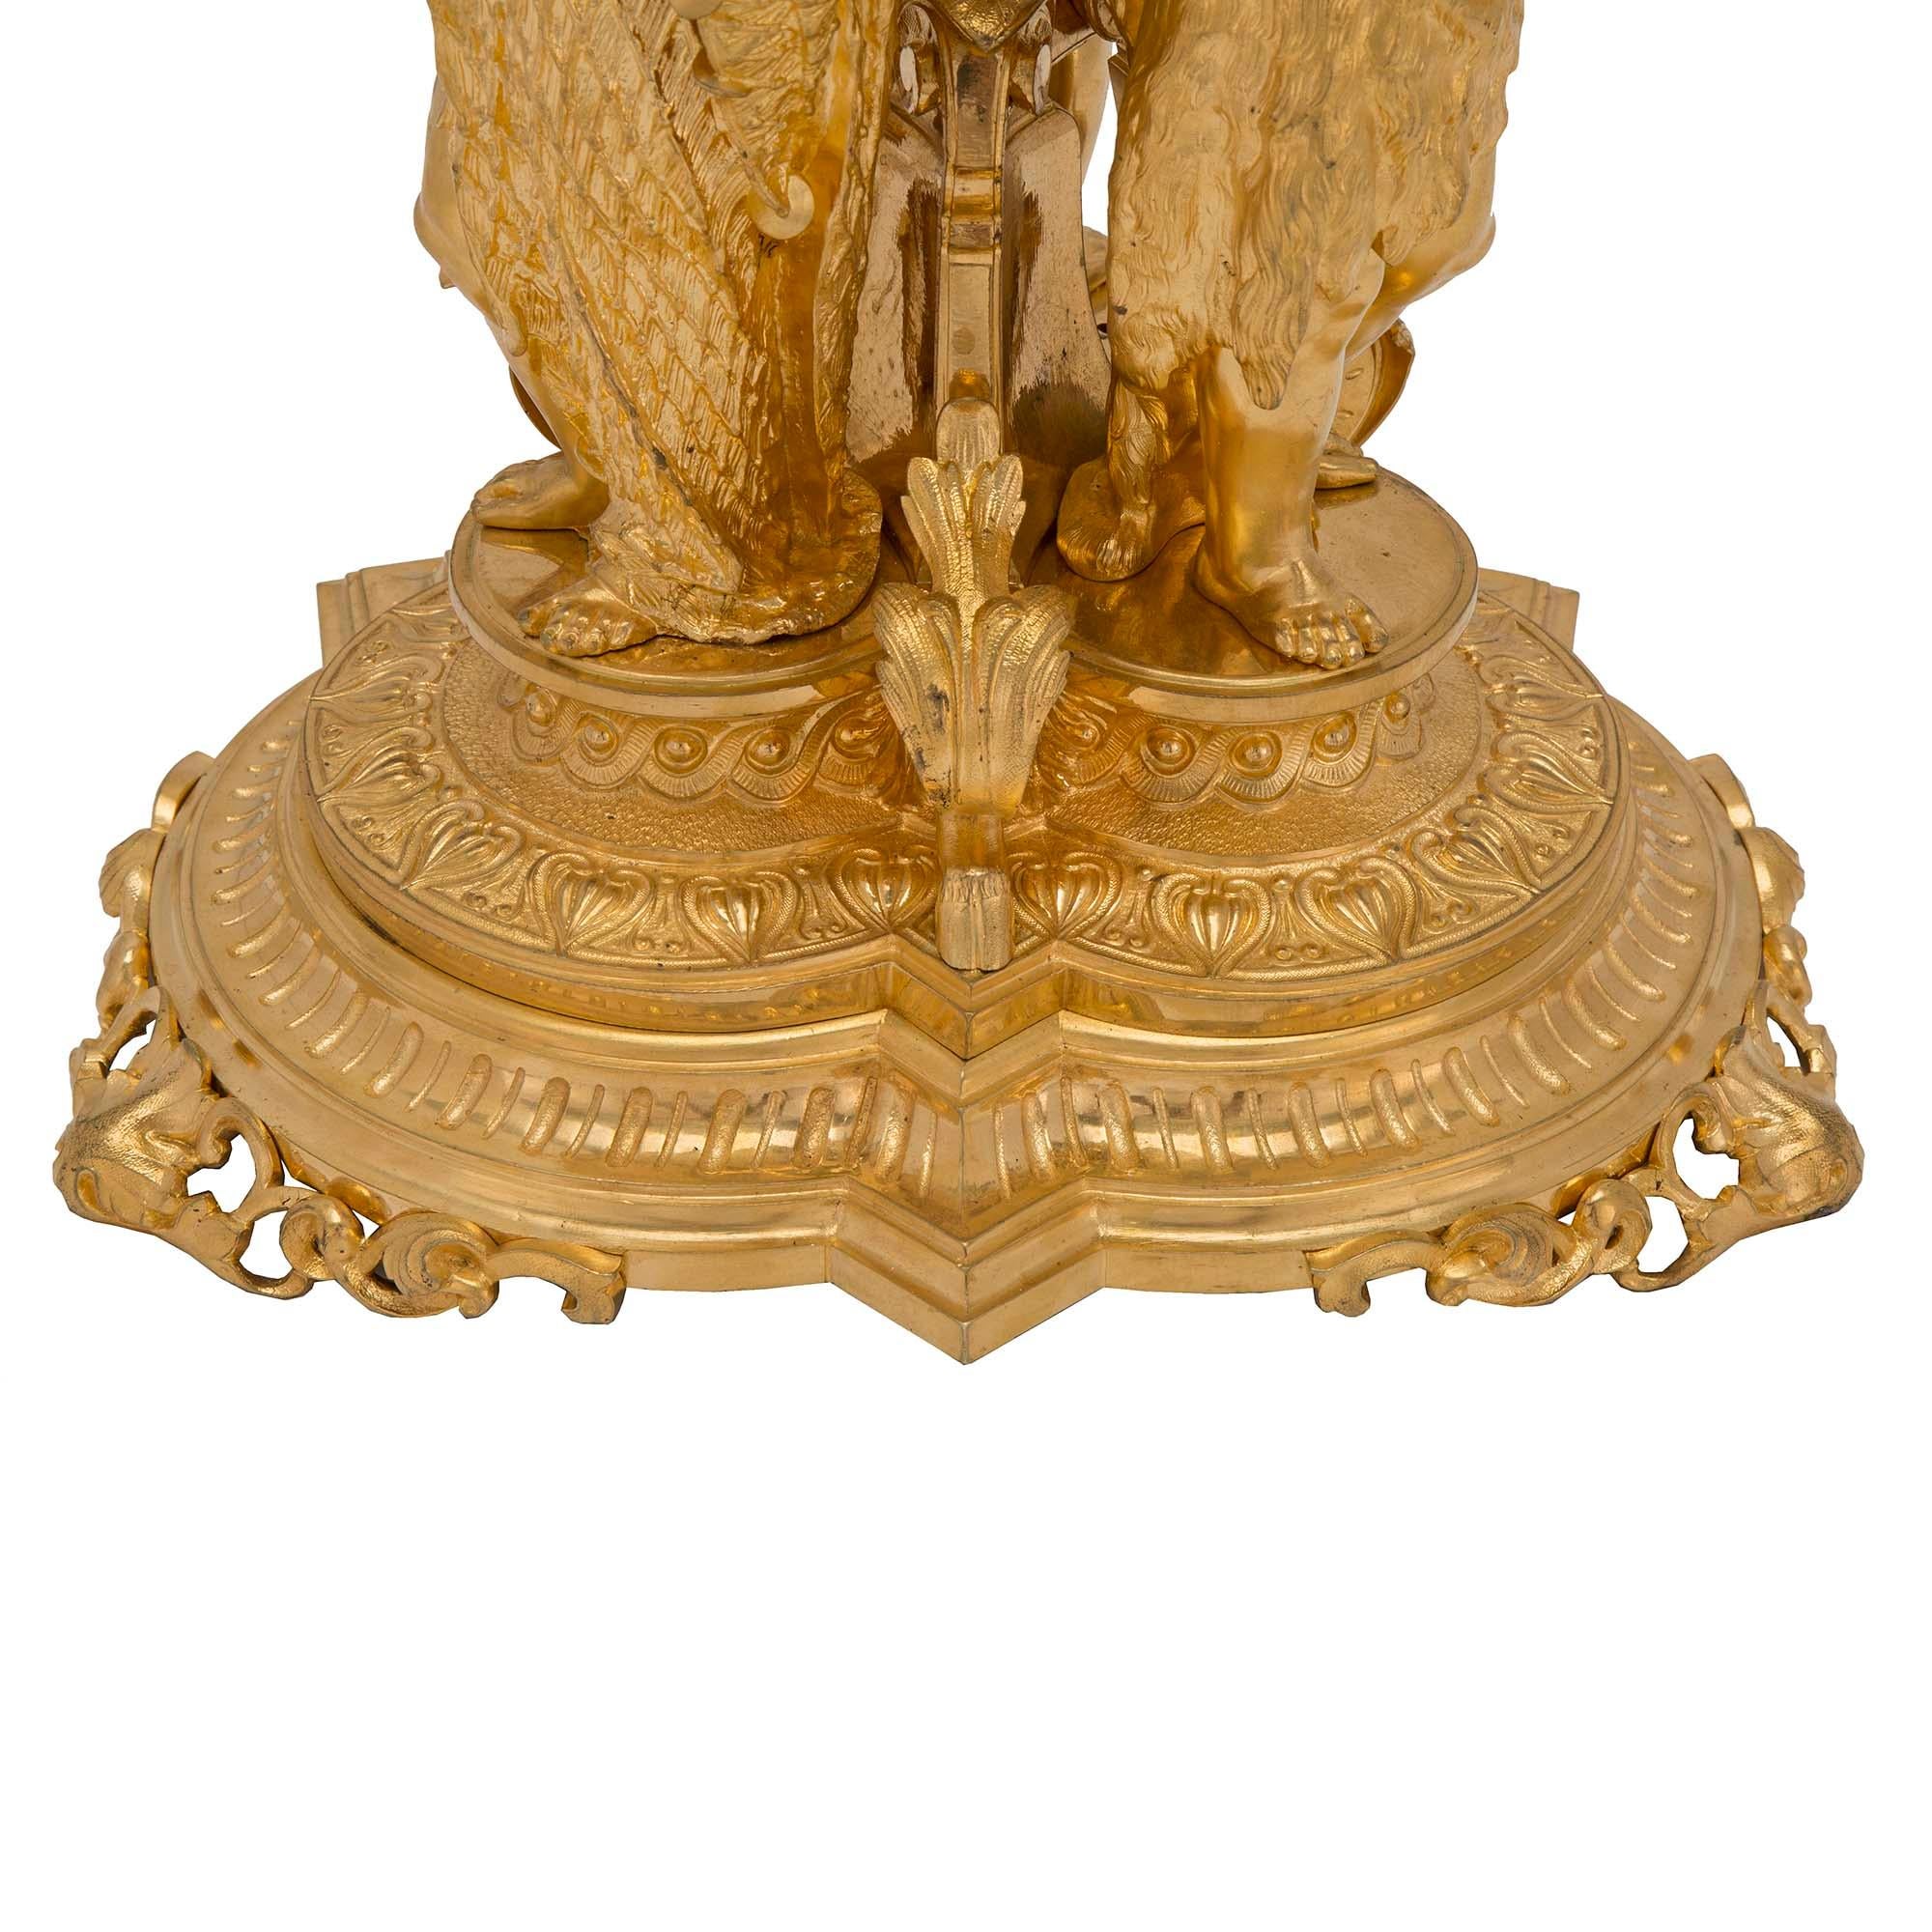 French 19th Century Louis XVI Style Ormolu Urn For Sale 5